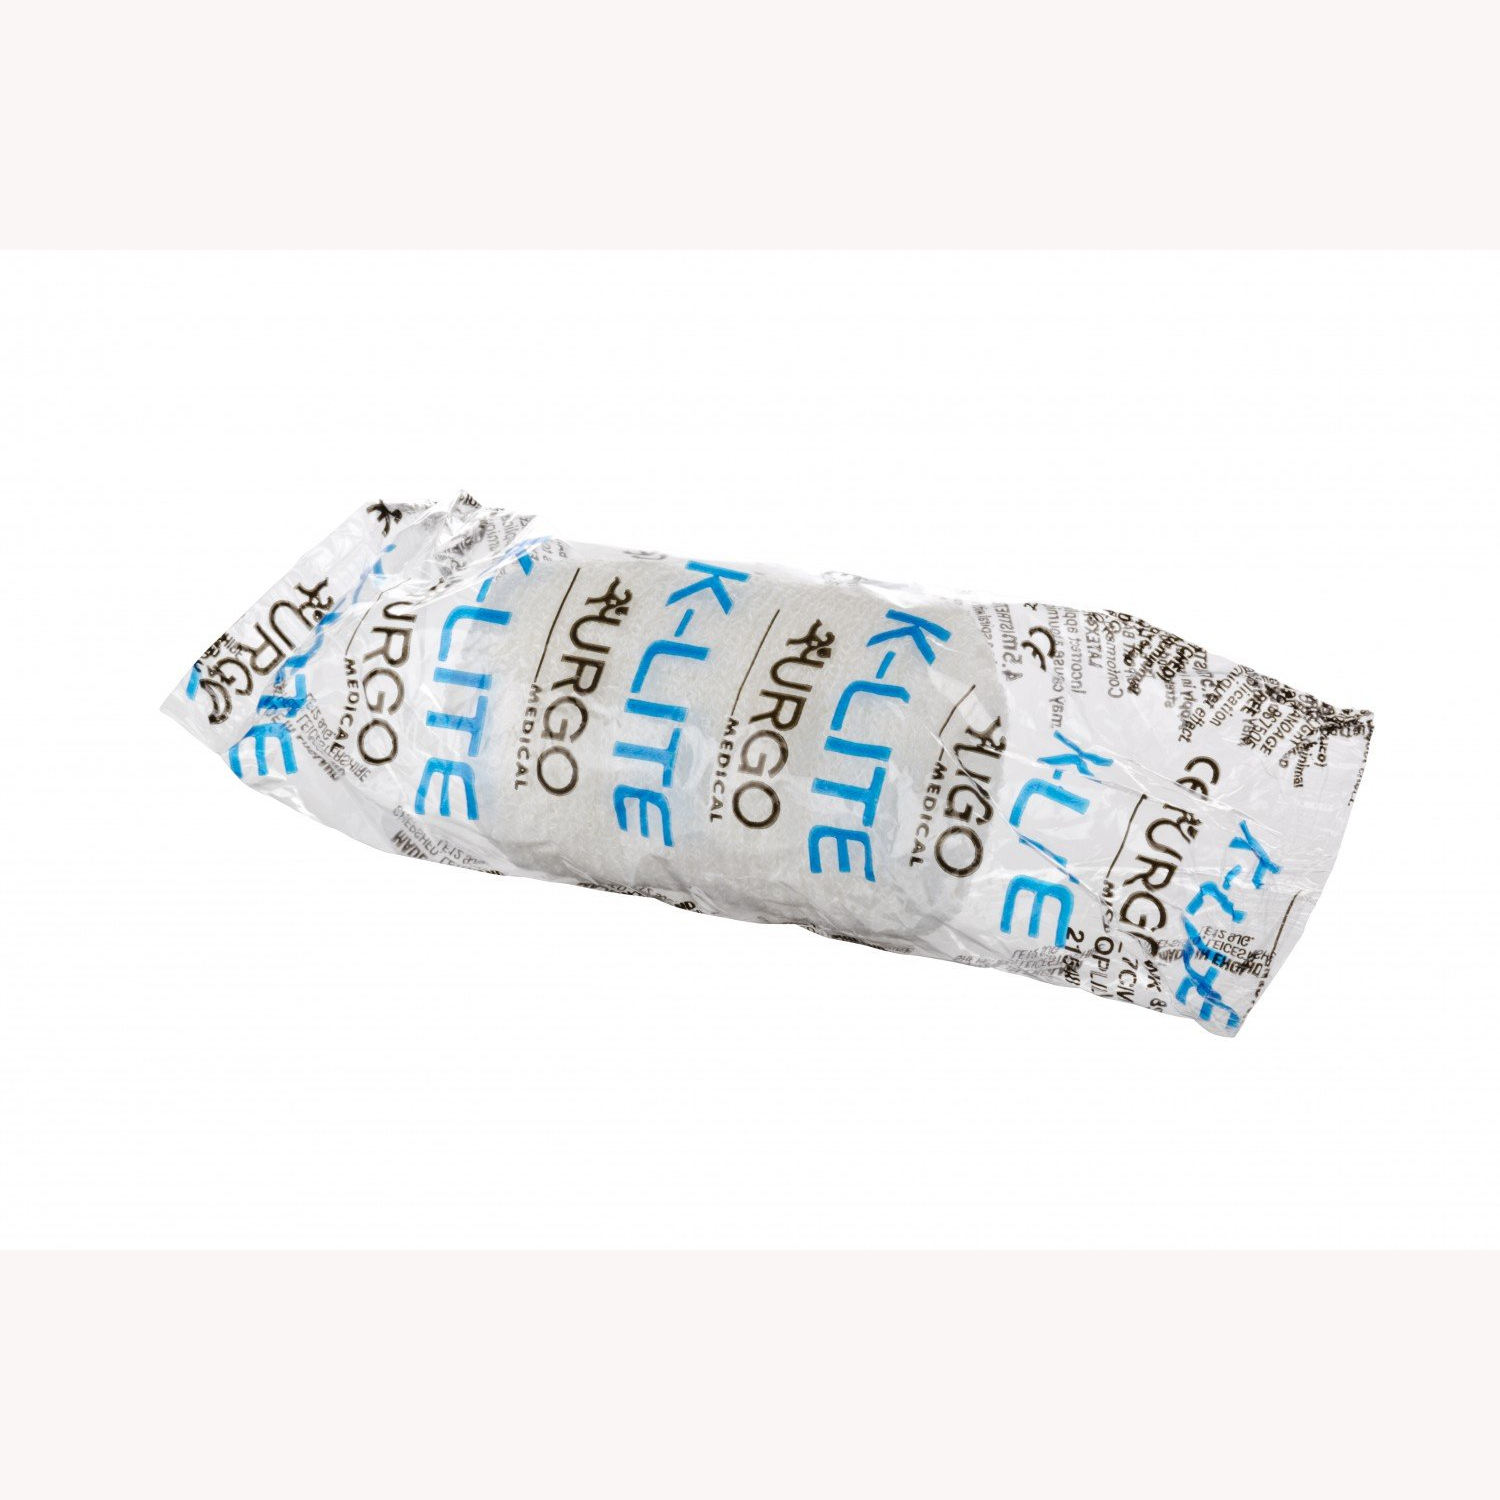 K Lite Type 2 Support Bandage | 10cm x 4.5m | Pack of 16